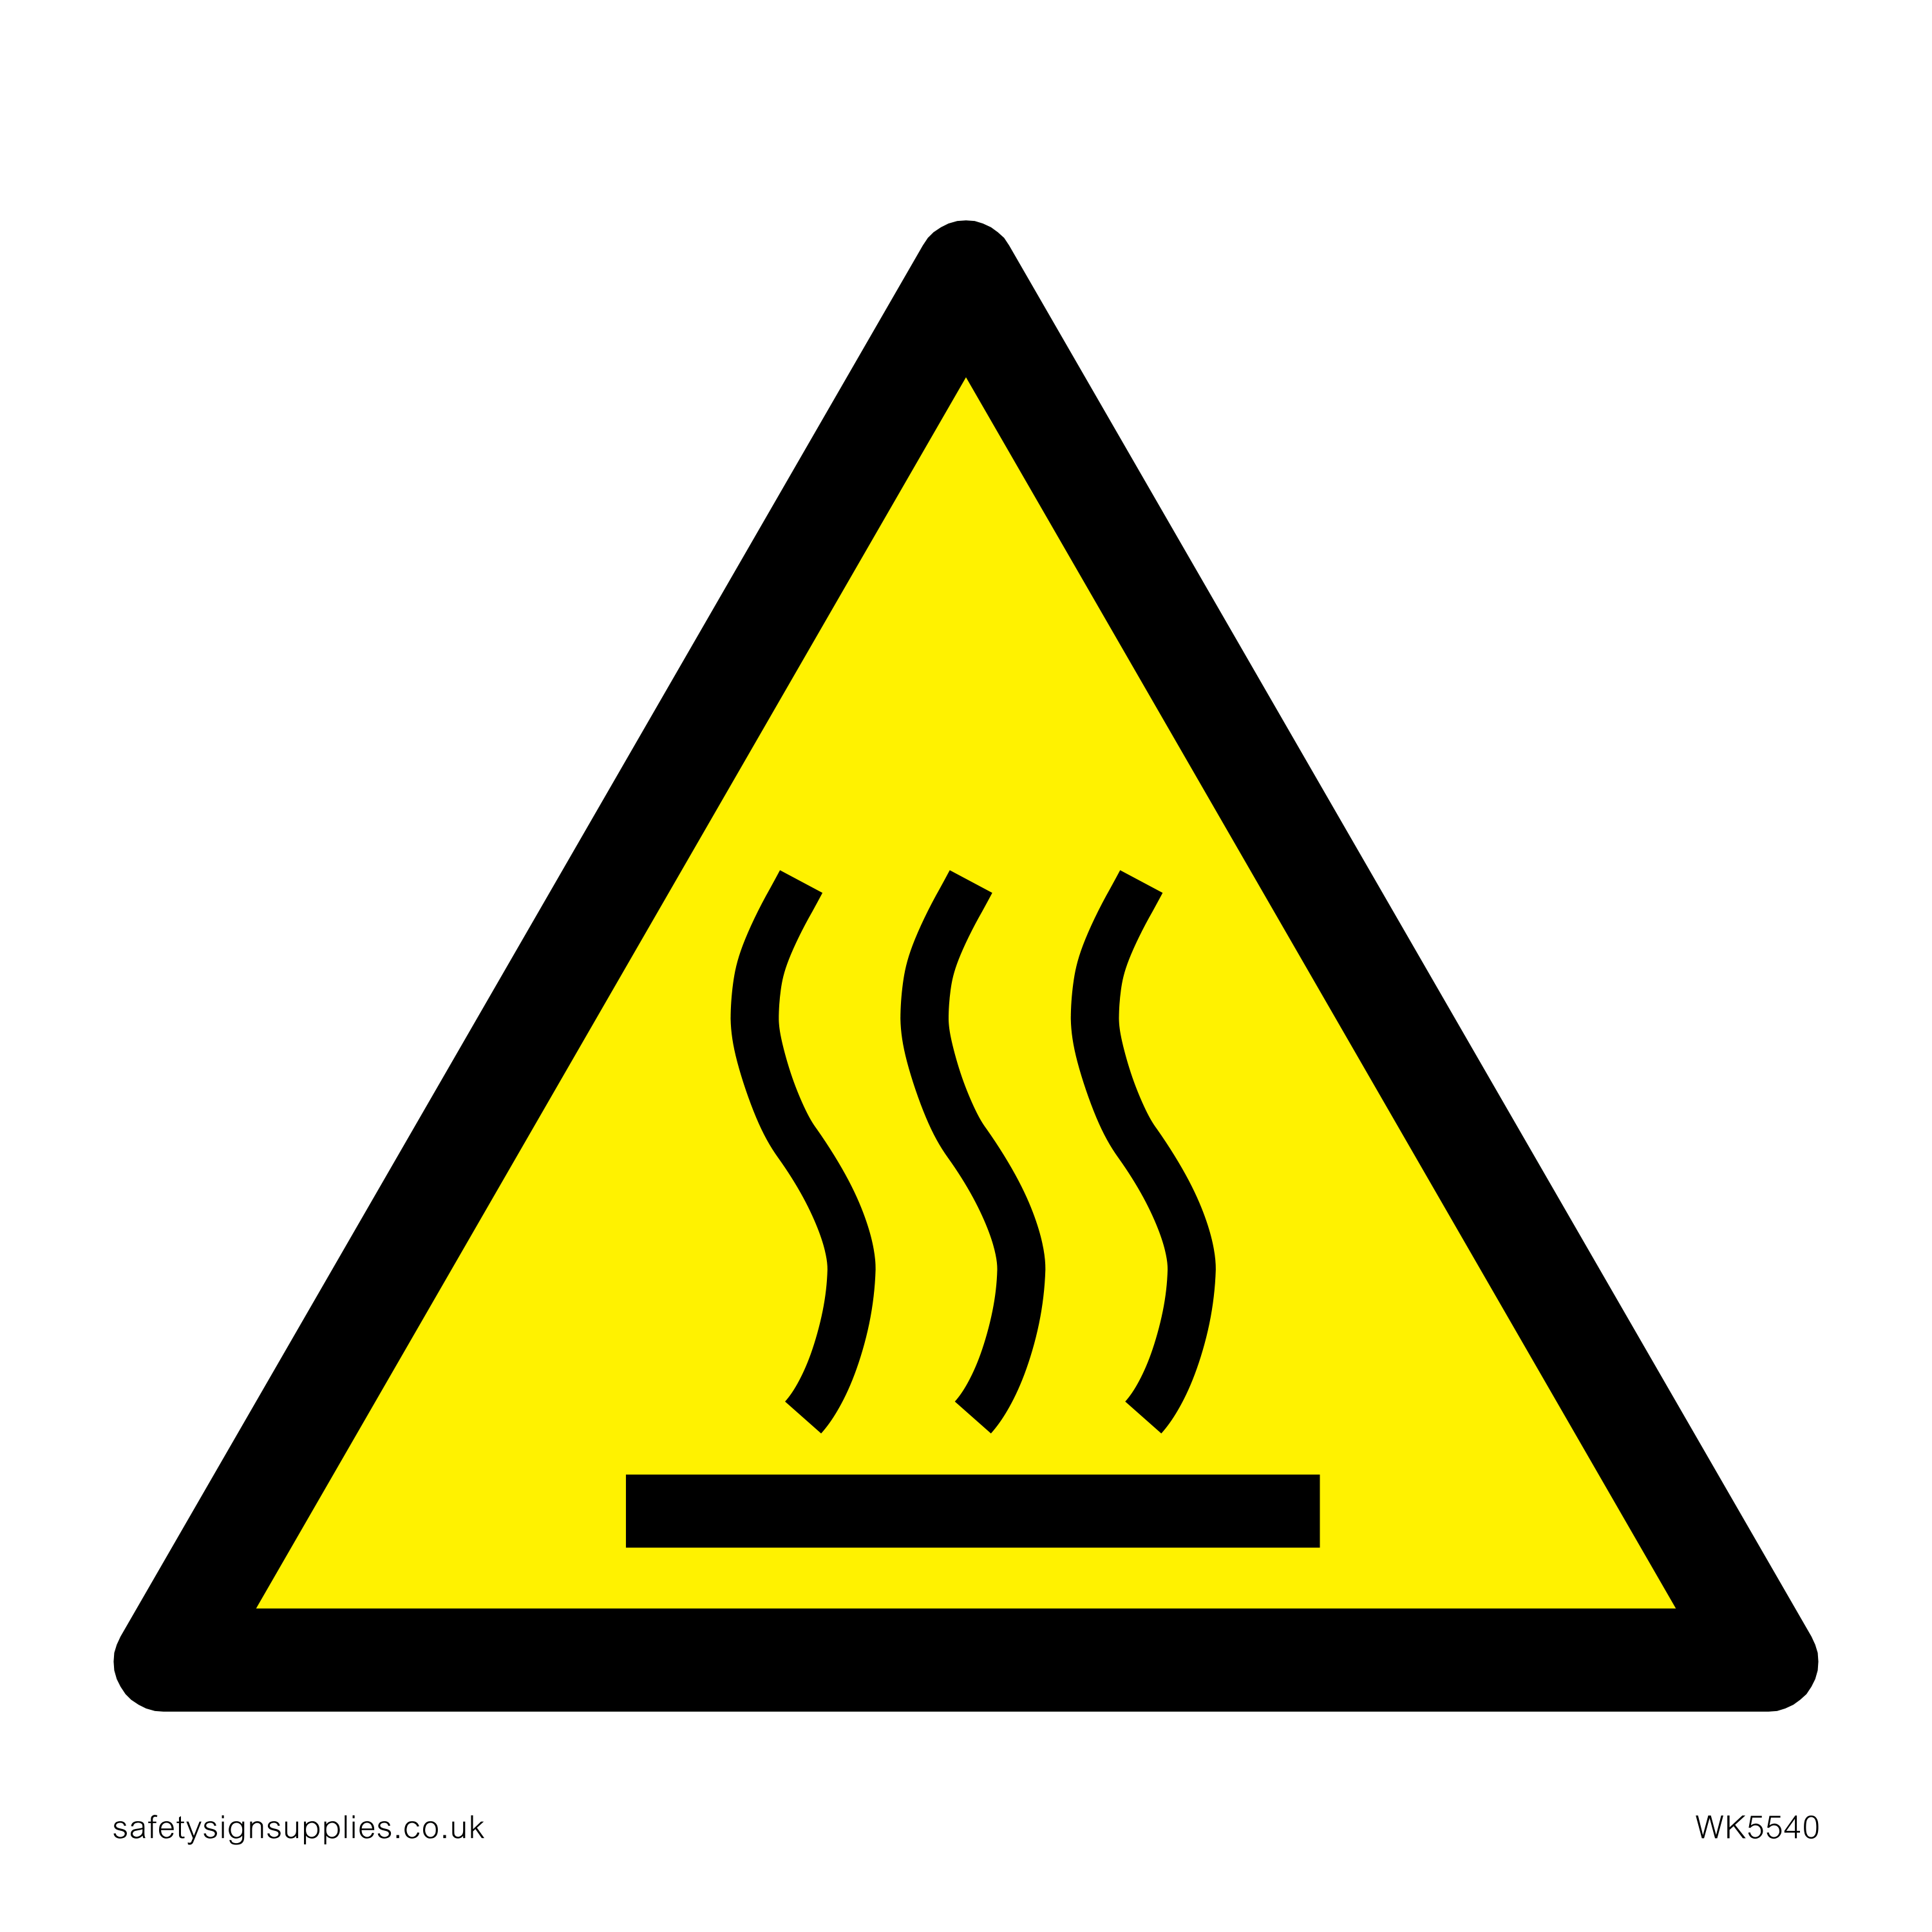 Warning Hot surface Symbol from Safety Sign Supplies